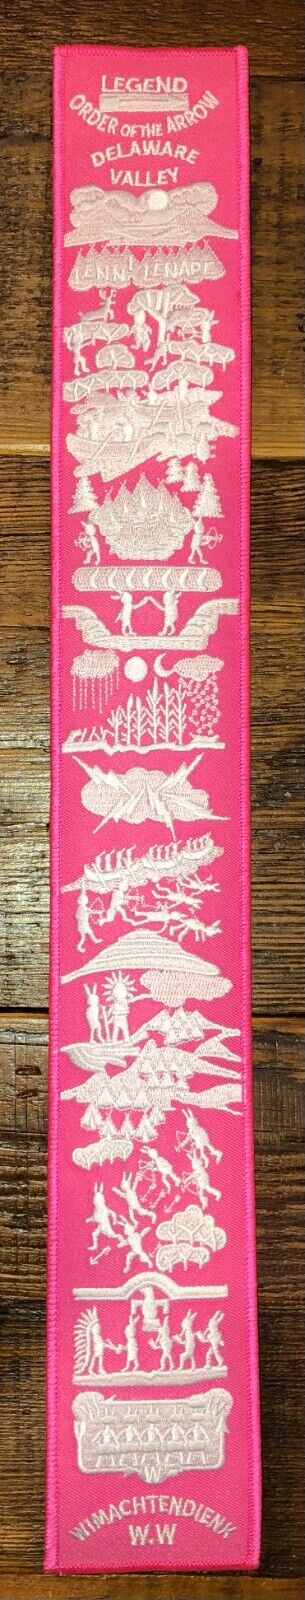 Boy Scout BSA OA Lodge Order of the Arrow Legend Sash Patch White//Pink